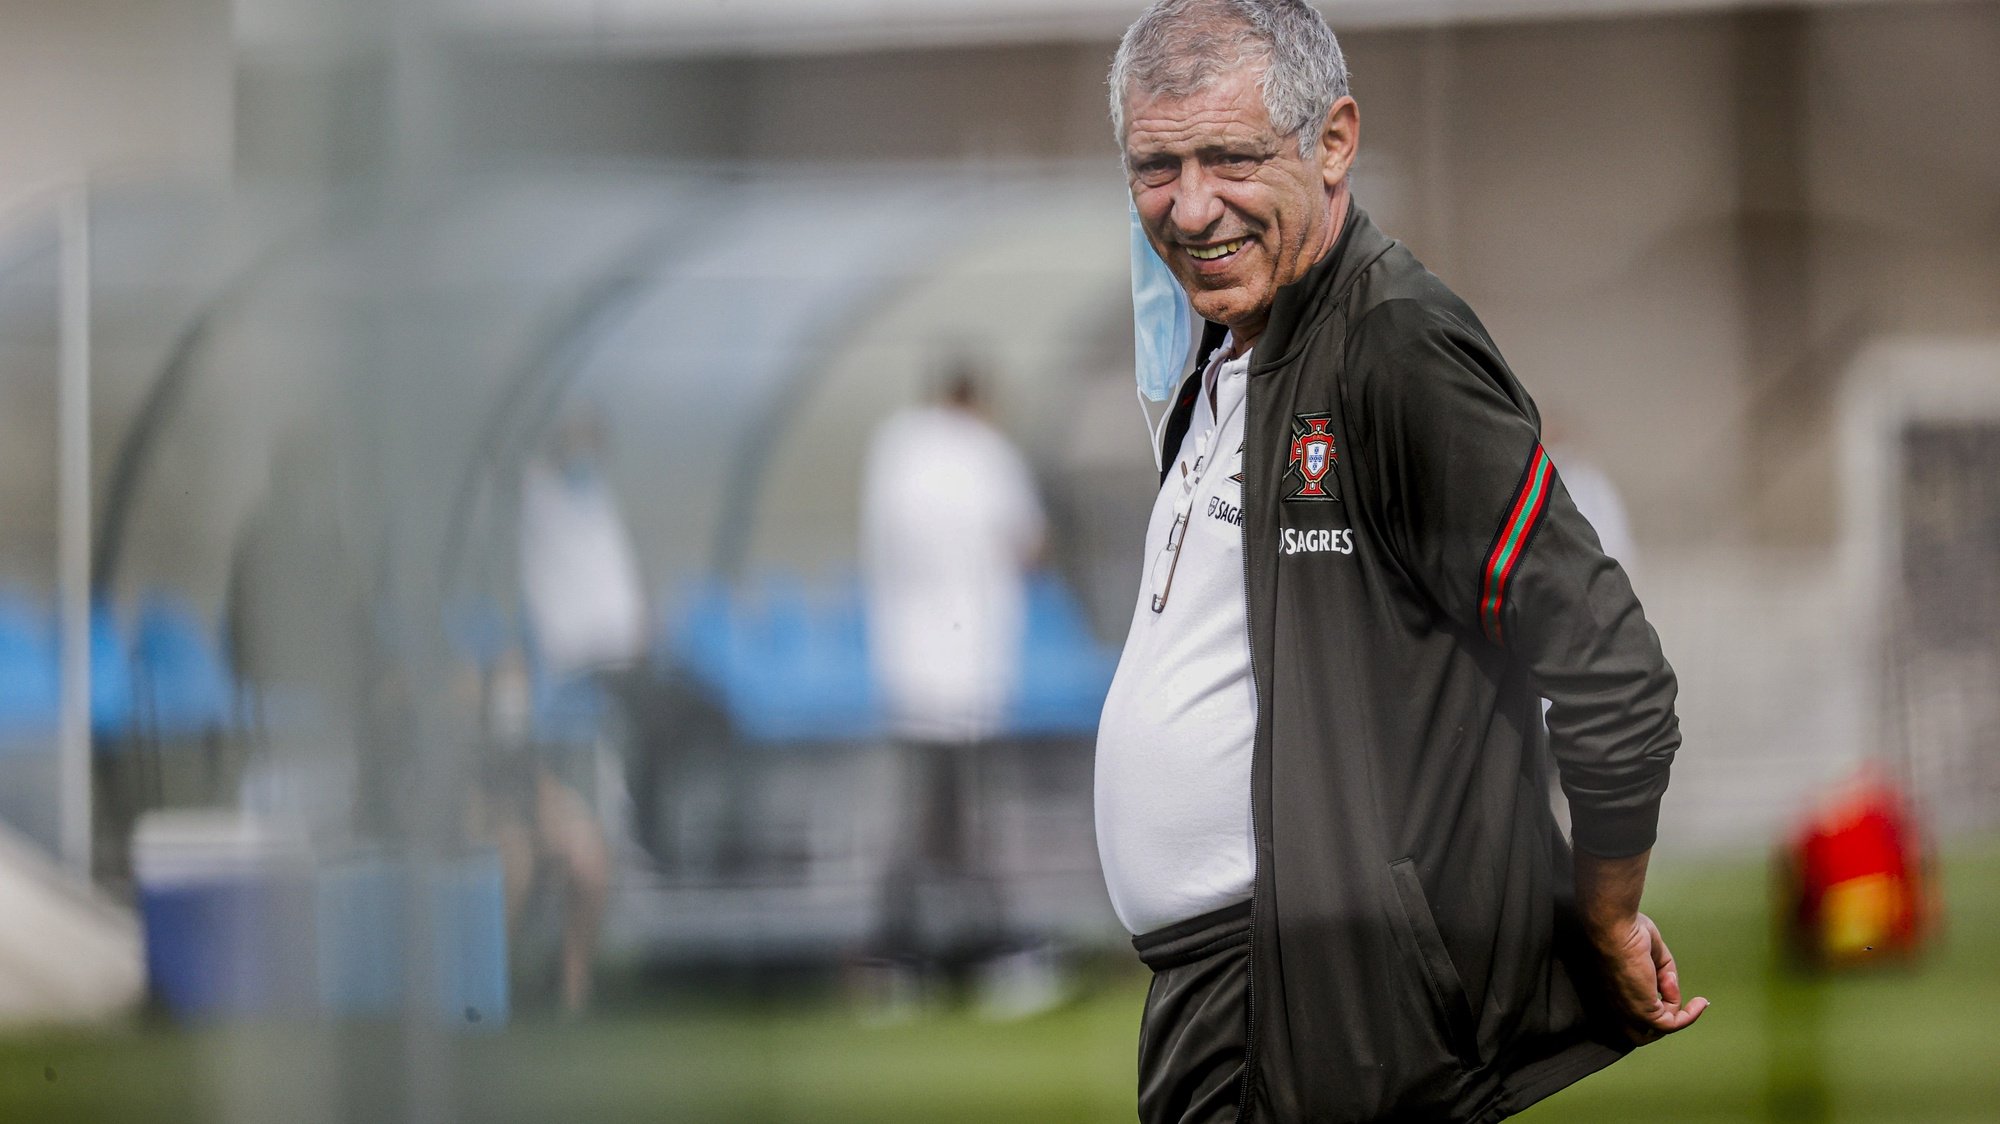 A handout photo made available by Portuguese Football Federation shows Portugal national soccer team head coach Fernando Santos during a training session for the upcoming UEFA Nations League soccer match with France to be held next 11th October in Paris, Lisbon, Portugal, 8th October 2020. DIOGO PINTO/FEDERAÇÃO PORTUGUESA DE FUTEBOL/LUSA